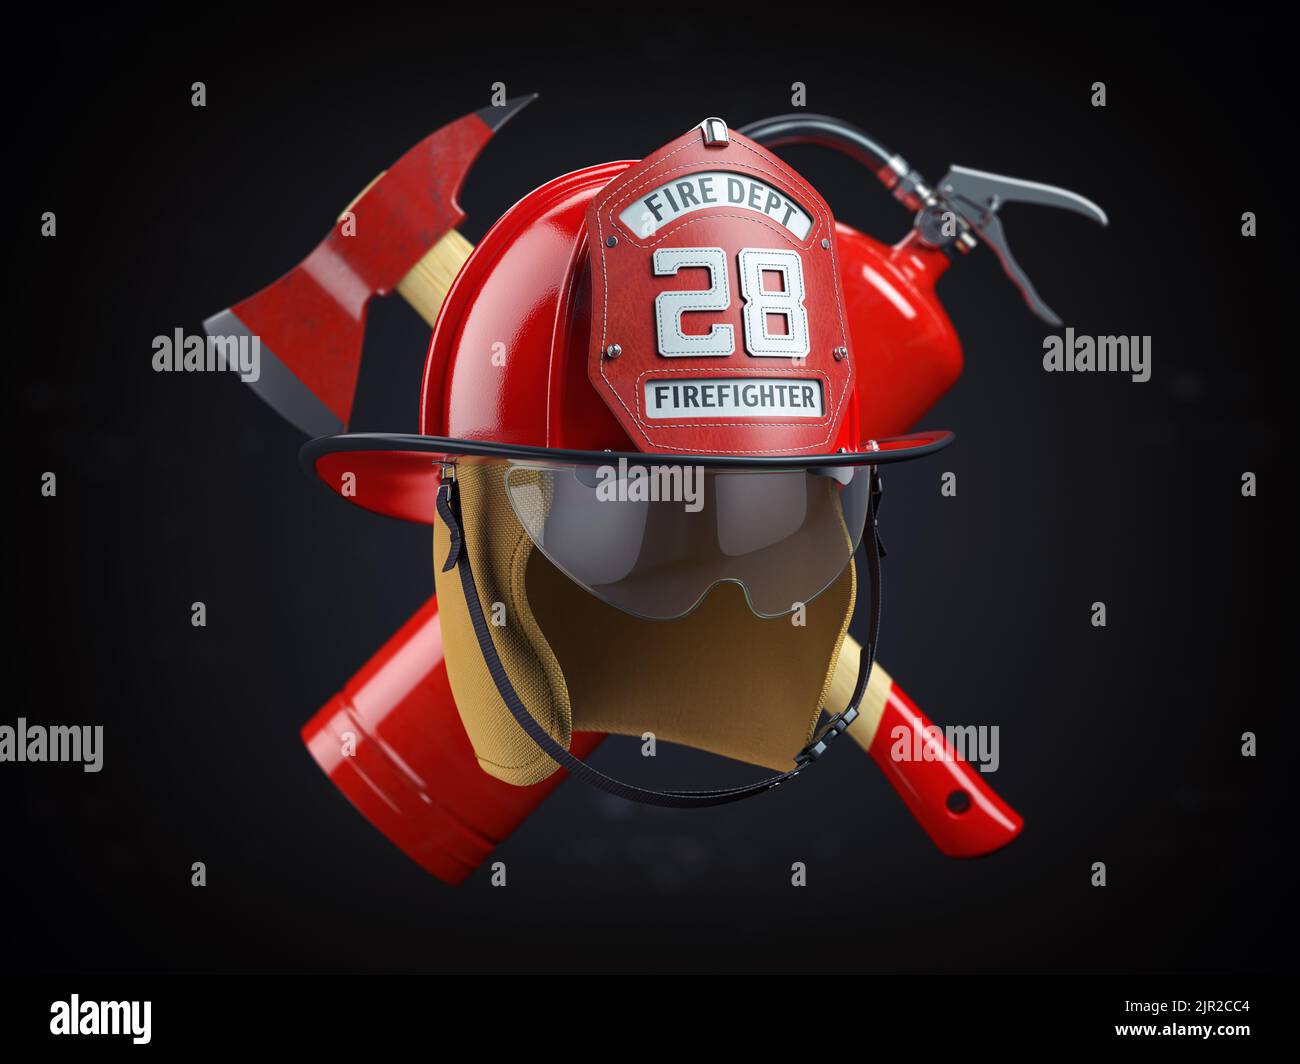 Fire Deprtment Emblem. Firefighter badge on a helmet with fire extinguisher and axe. 3d illustration Stock Photo